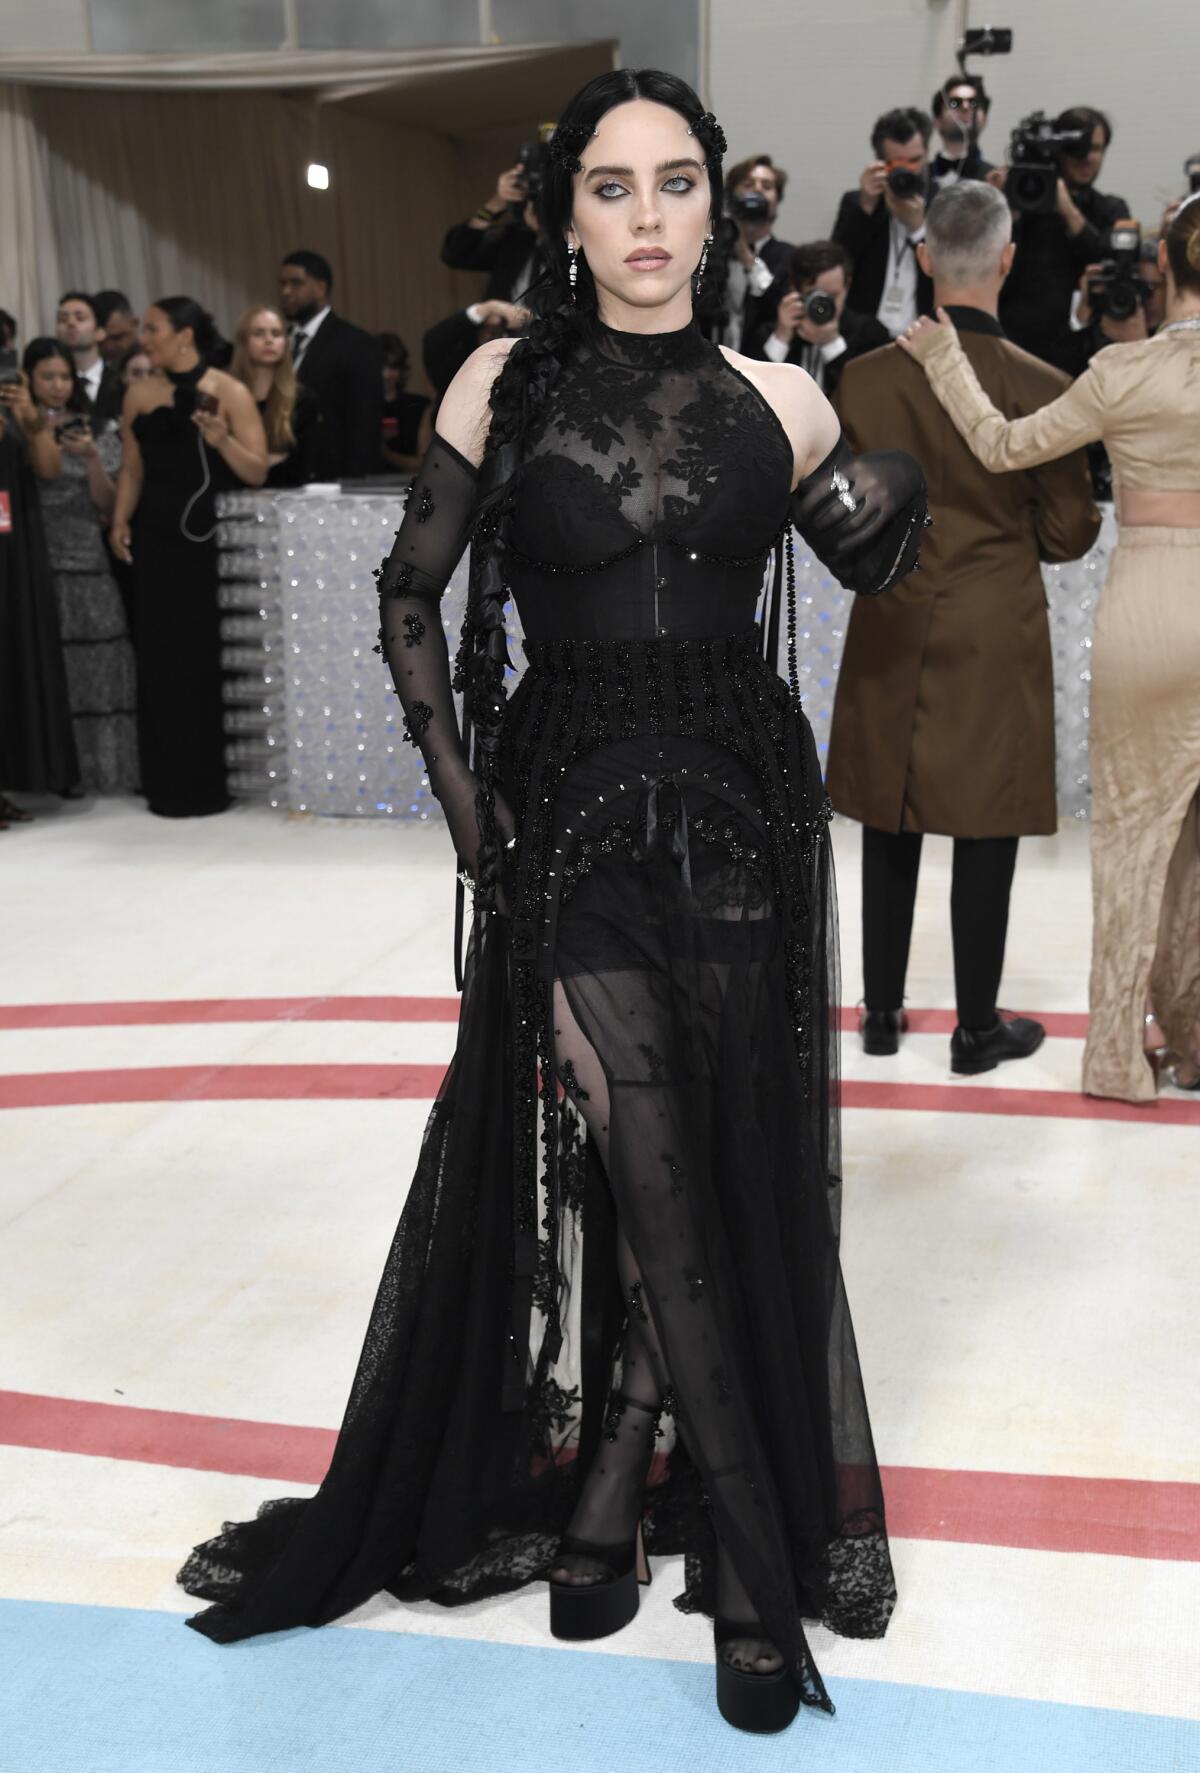 Billie Eilish with jet-black hair in a braided ponytail wearing a sheer black mesh and lace gown. 